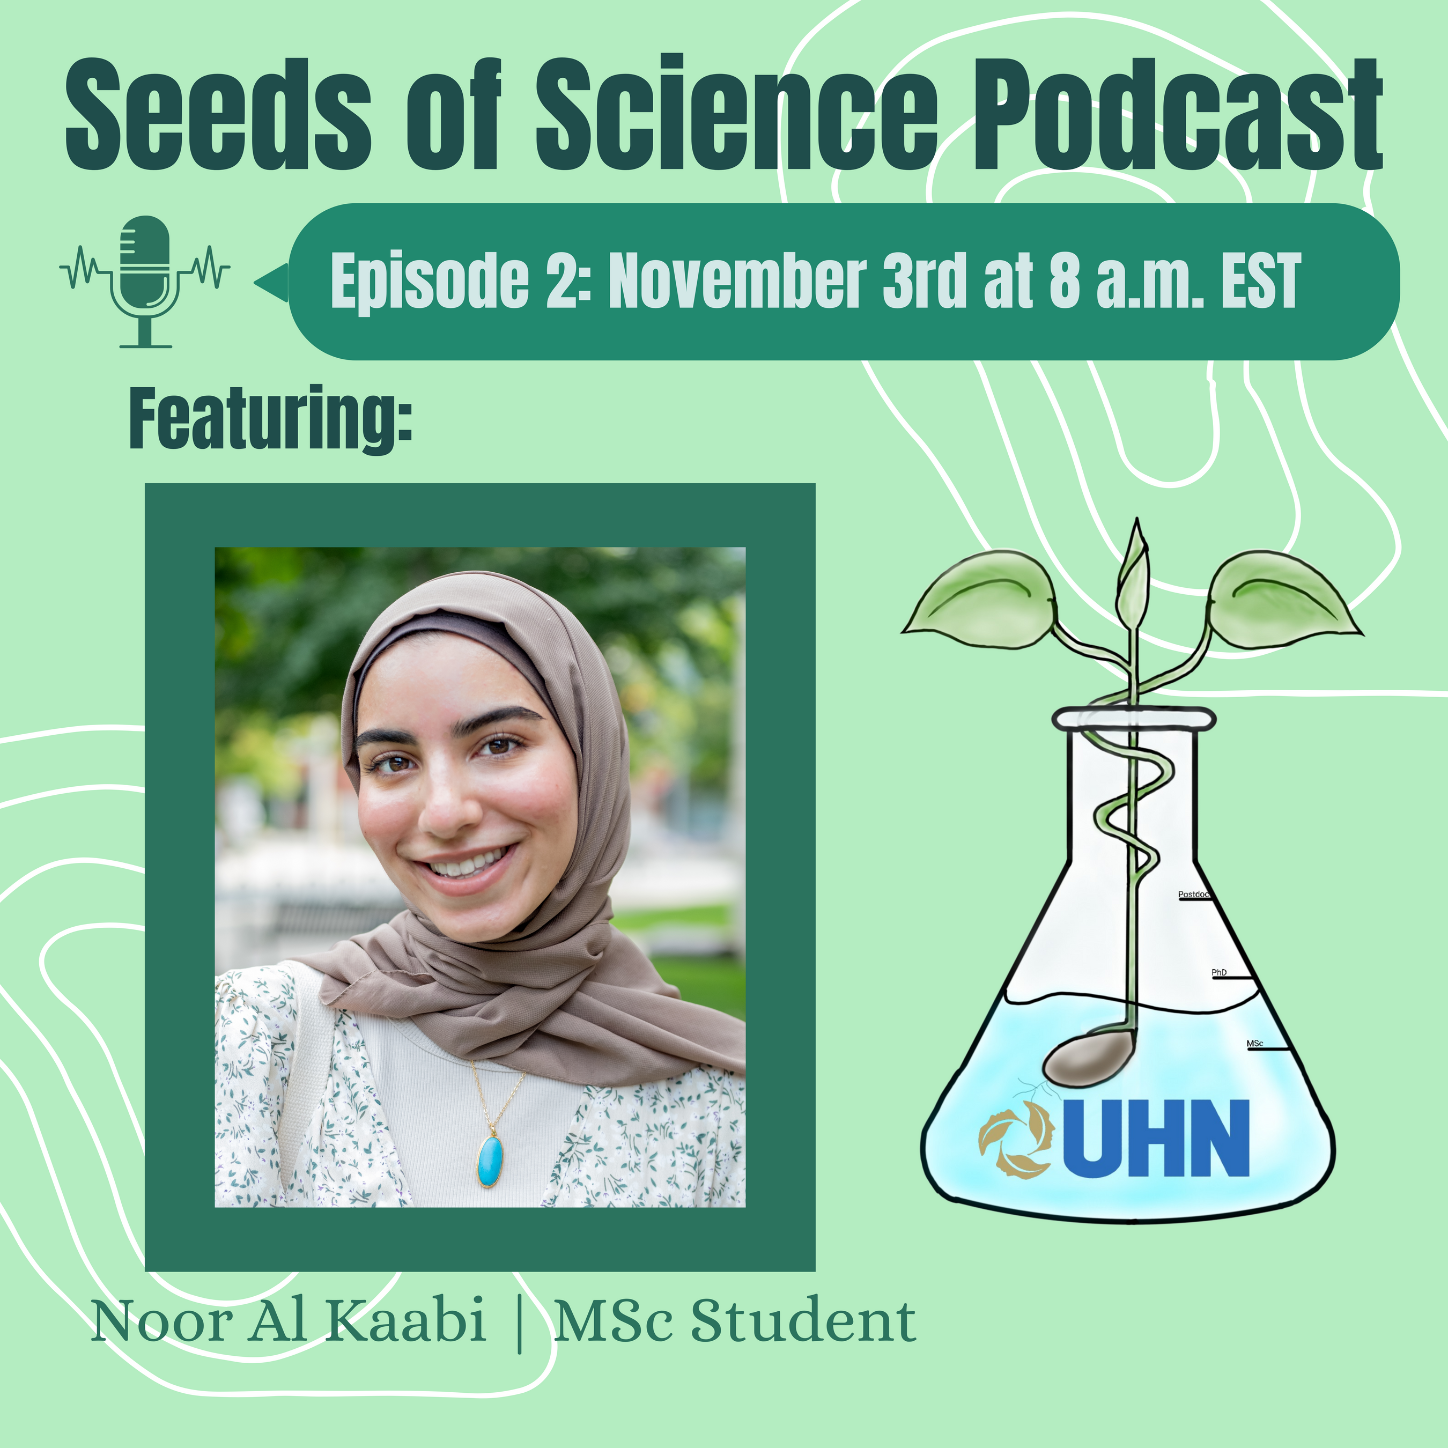 Seeds of Science Podcast poster. Episode 2: November 3rd at 8 am EST. Featuring Noor Al Kaabi. A photo of Noor is seen in the middle left. On the middle right is the Seeds of Science logo